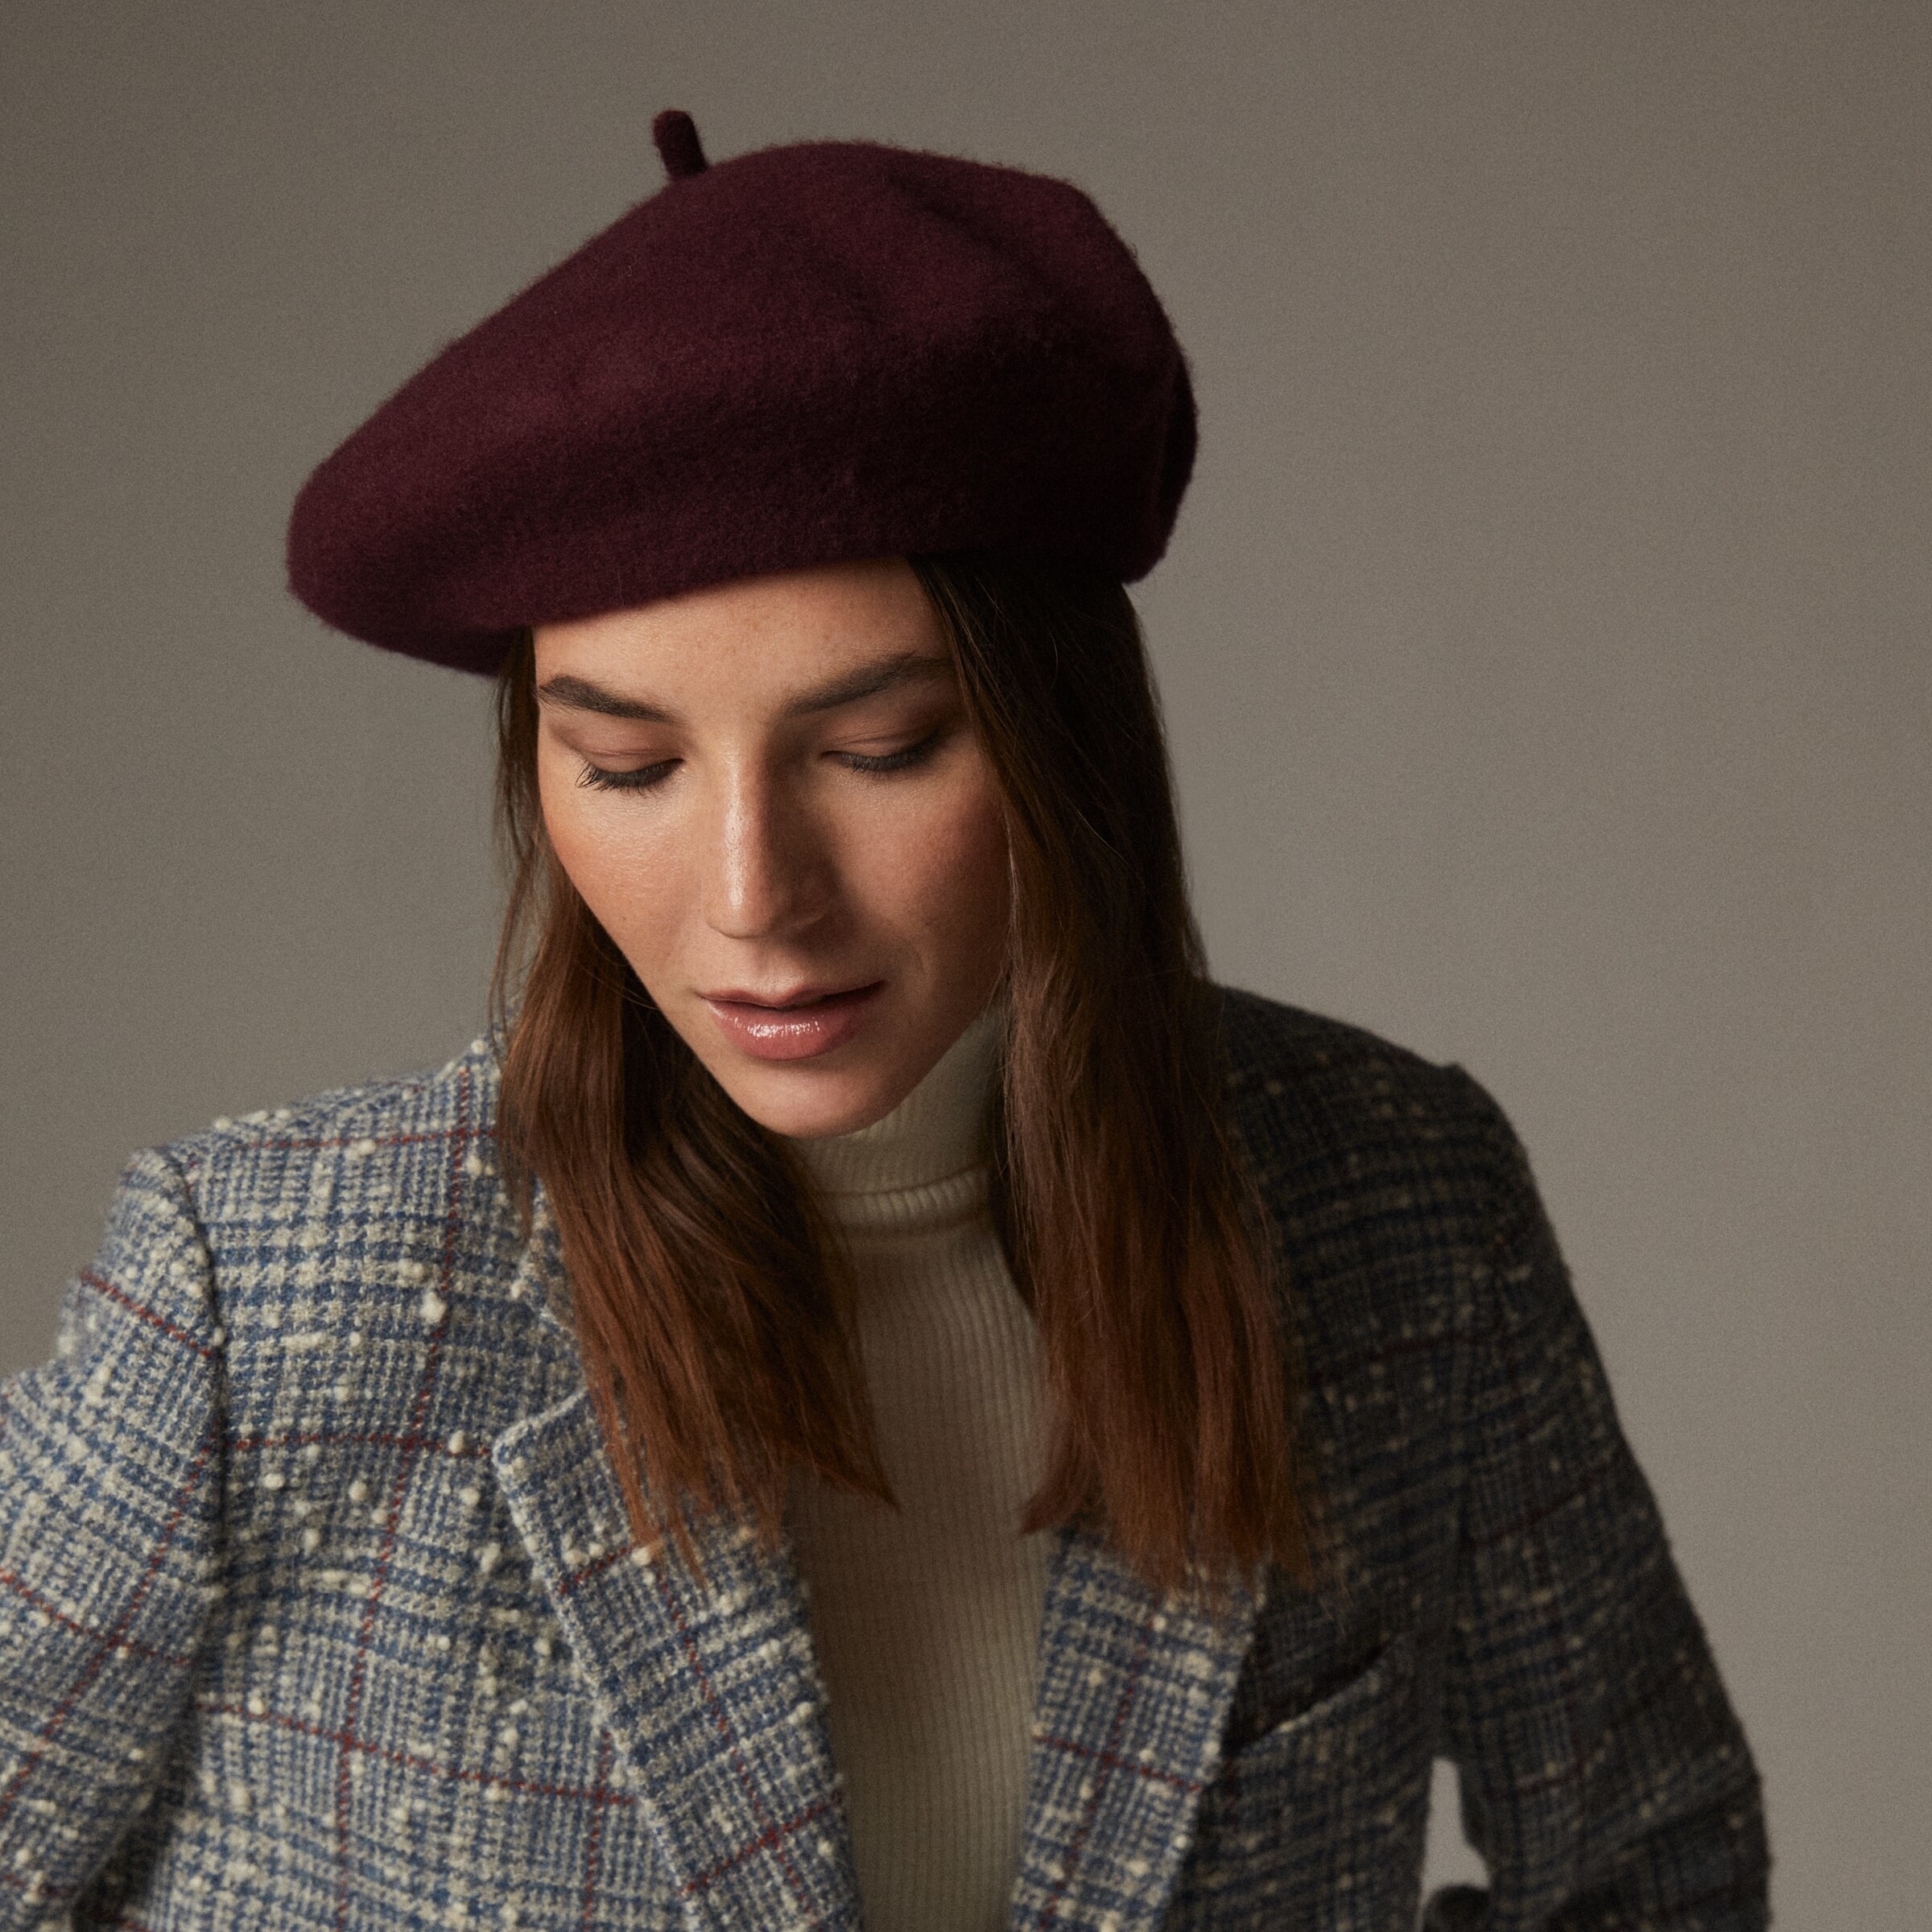 A person wearing a beret with their wool coat